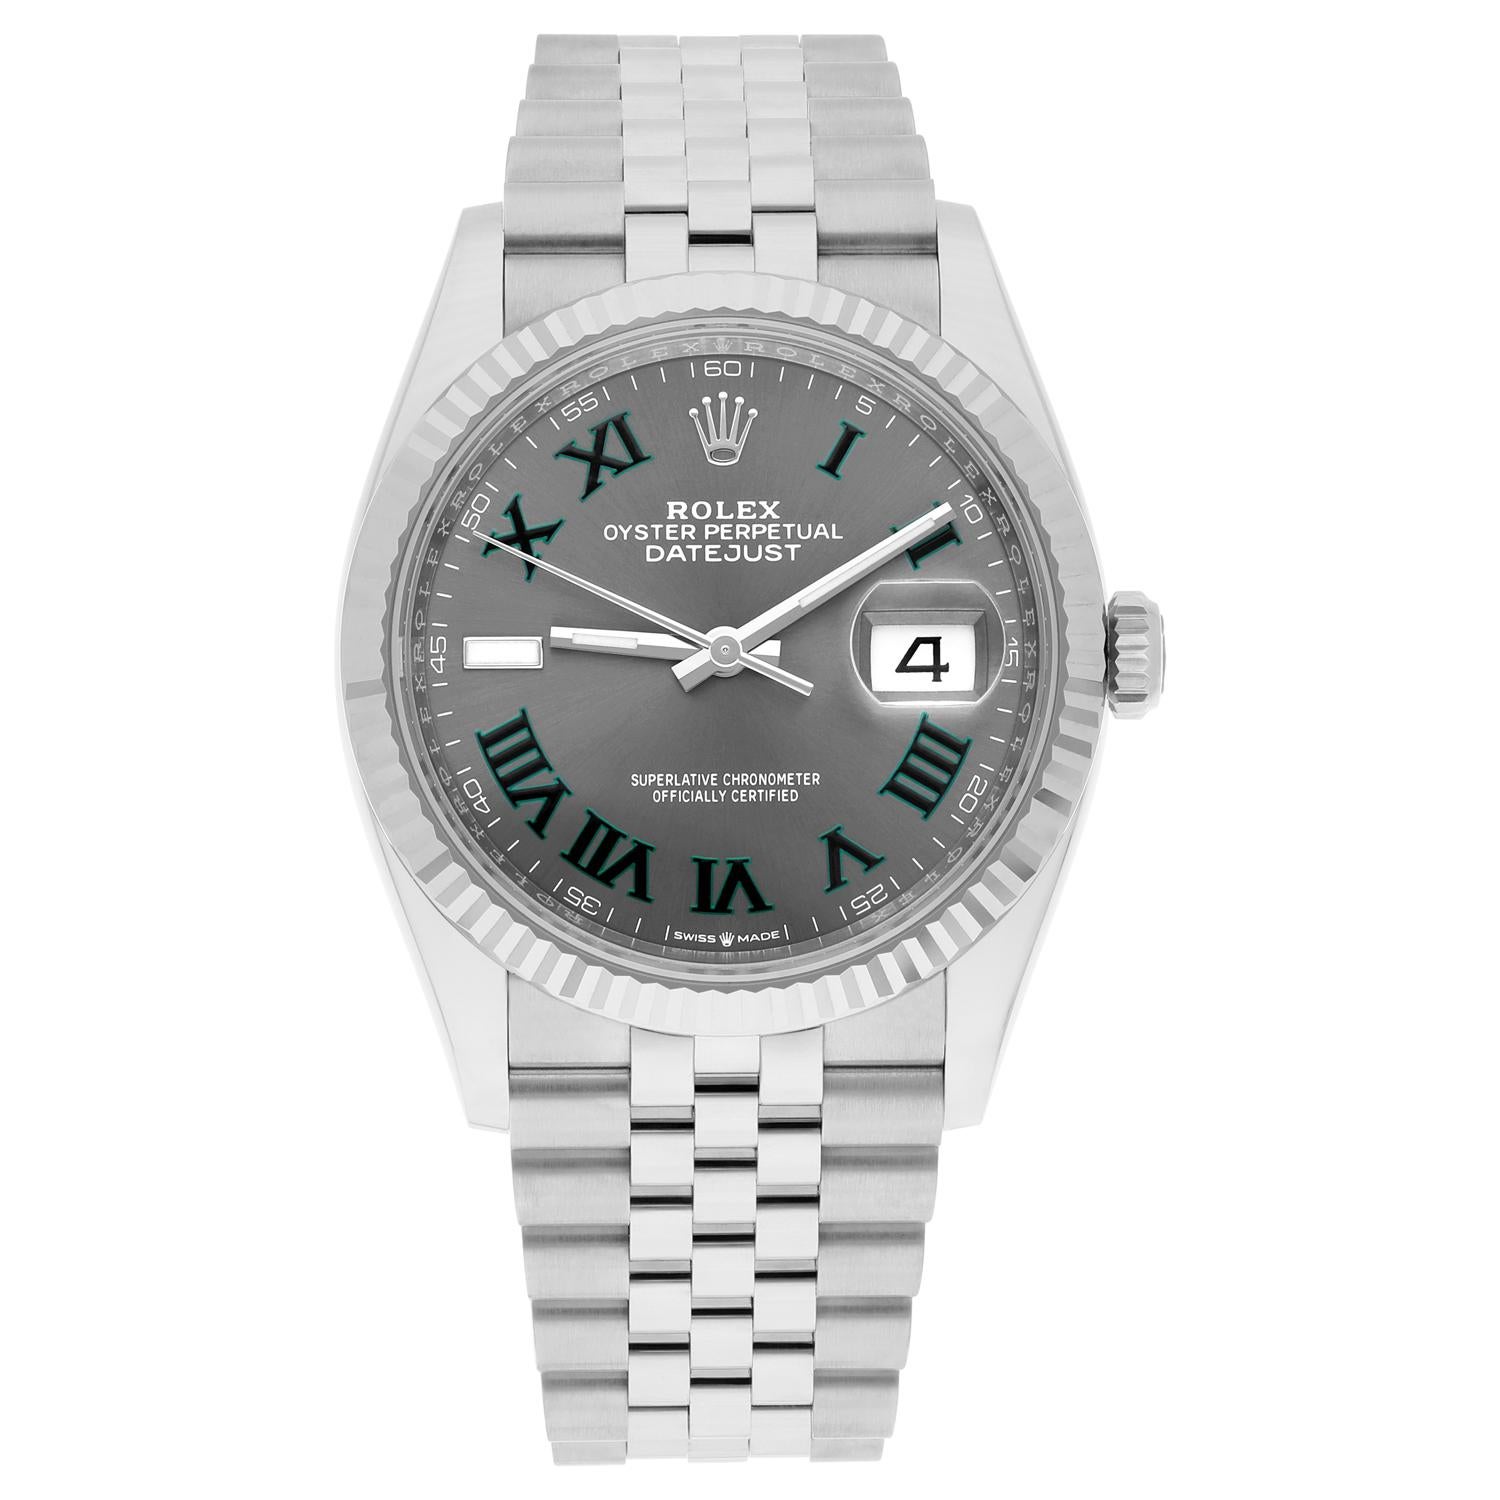 This Rolex Datejust wristwatch is a luxury timepiece with a round, 36mm stainless steel case and a Wimbledon dial featuring Roman numerals. The watch has a fluted, fixed 18K white gold bezel and is water-resistant up to 100 meters. The